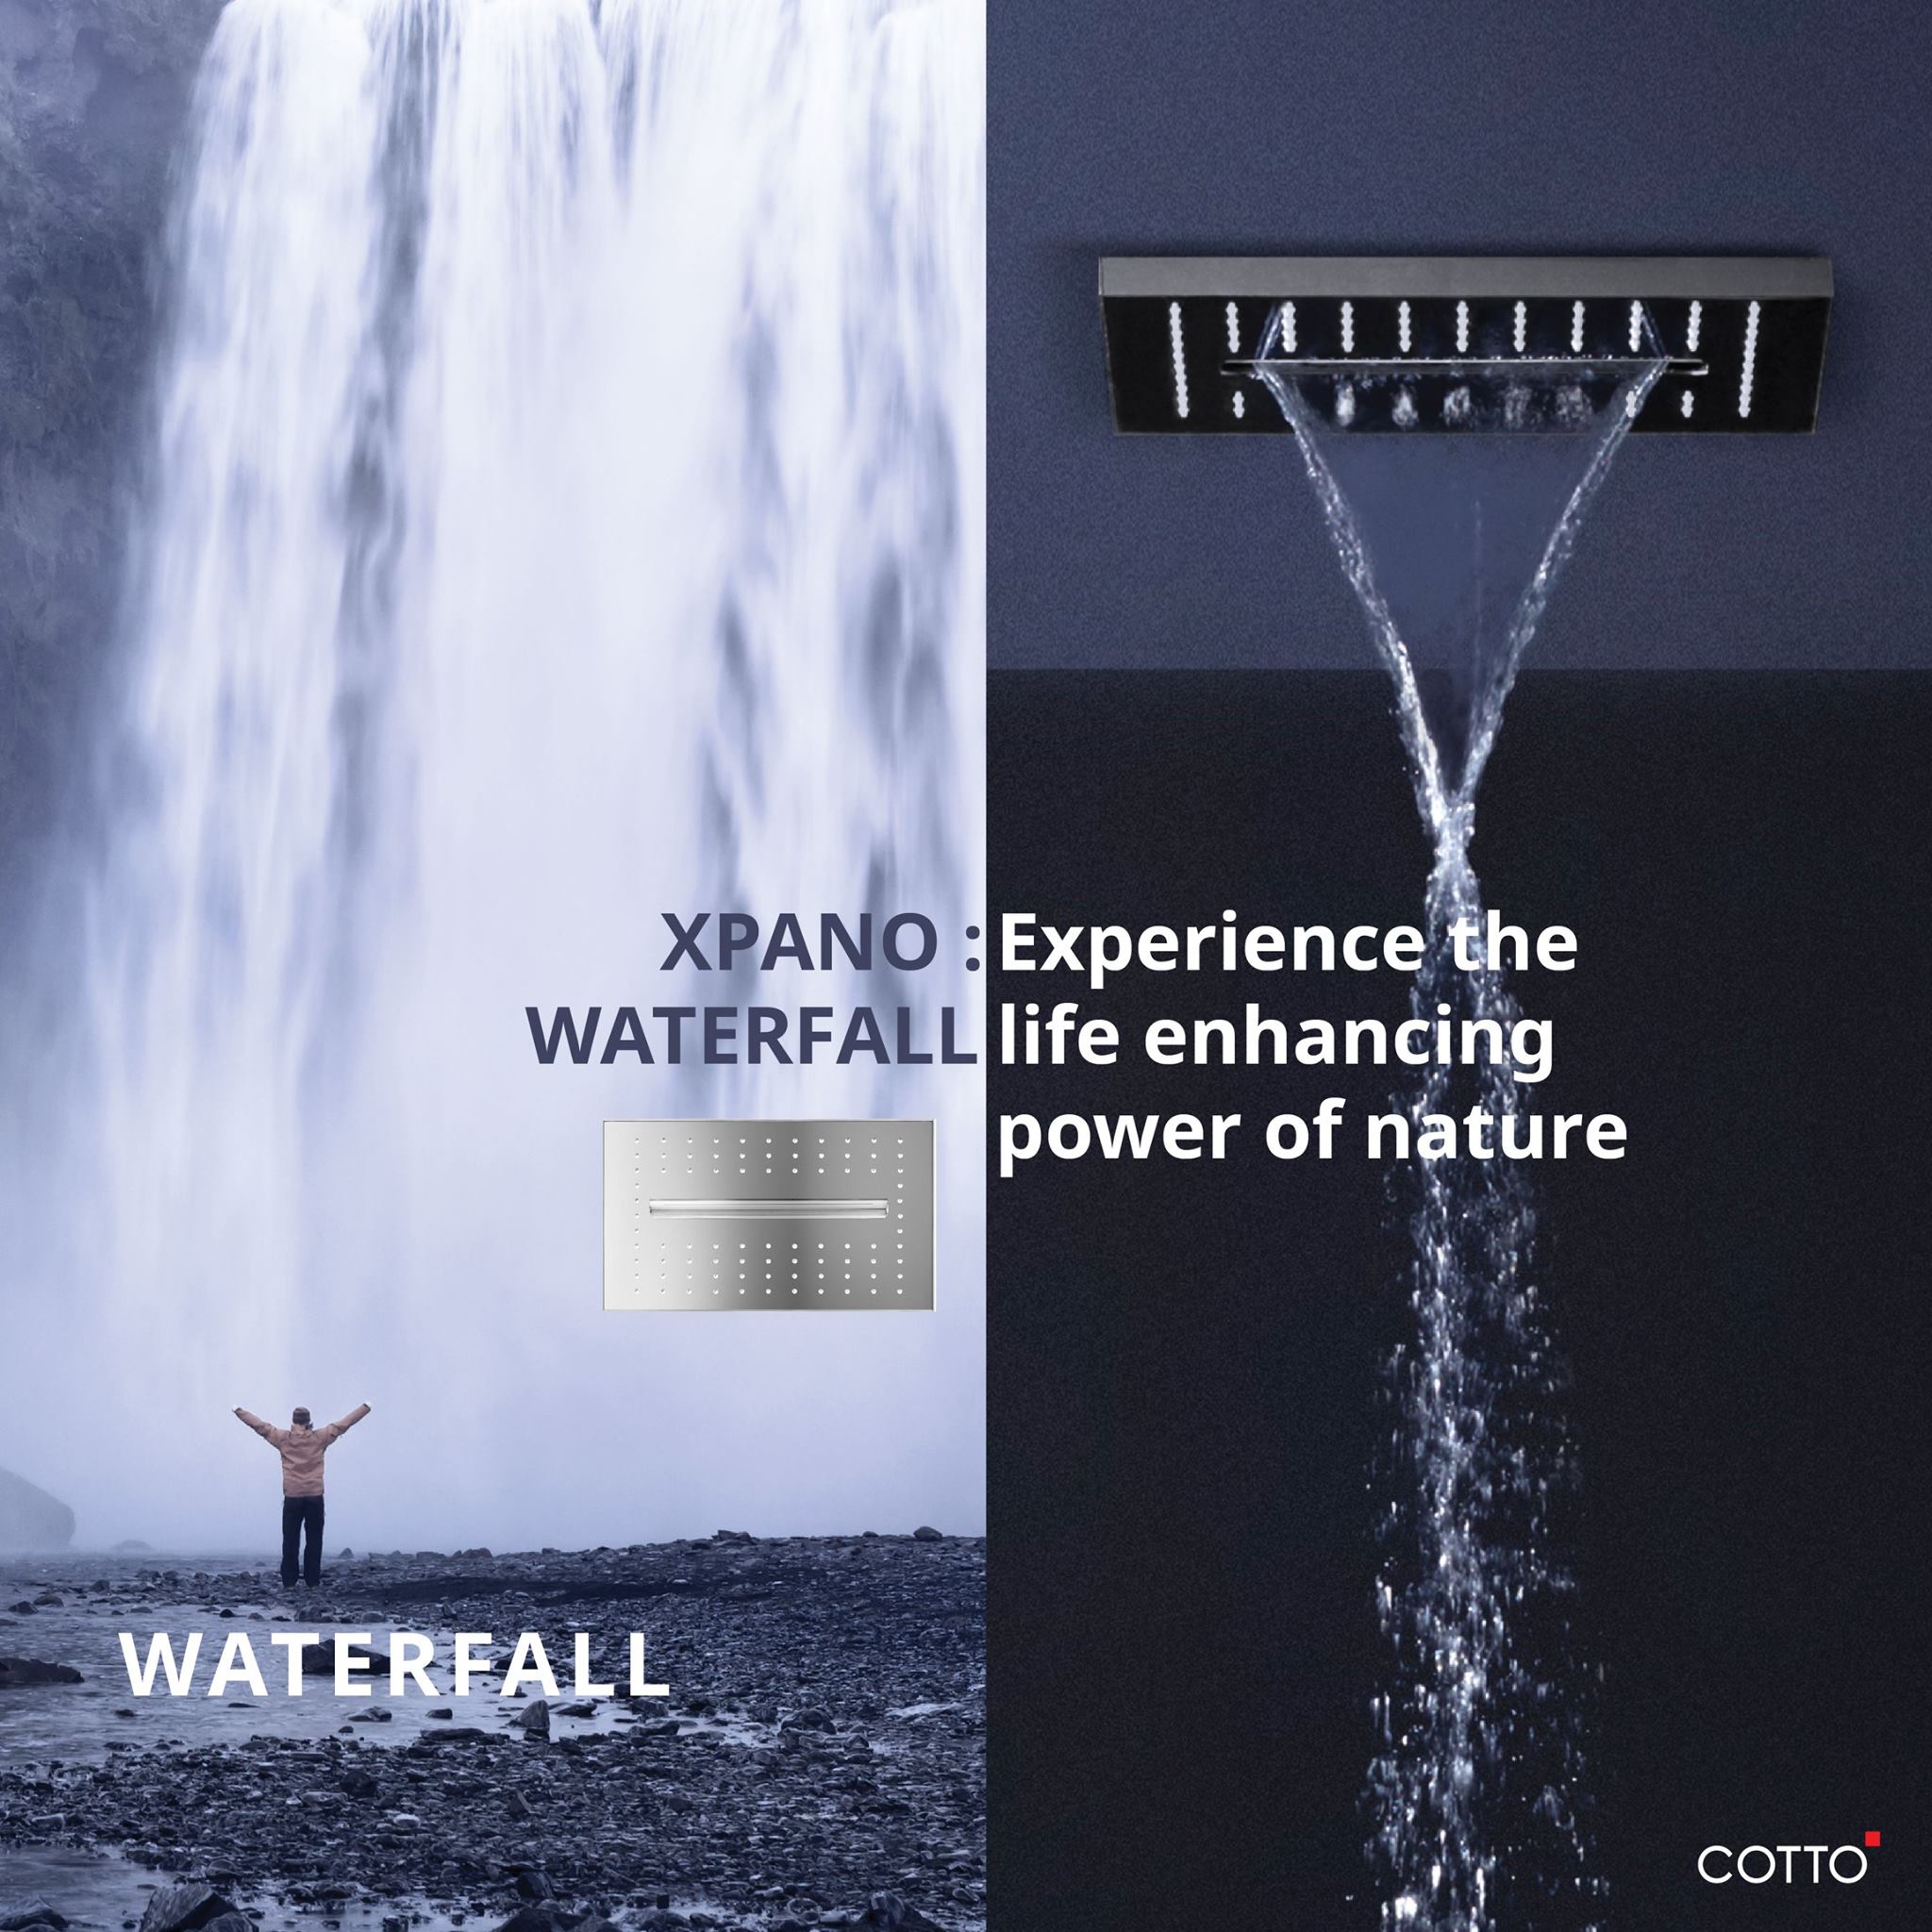 Cotto Xpano Shower Series - the best seller showers in Thailand